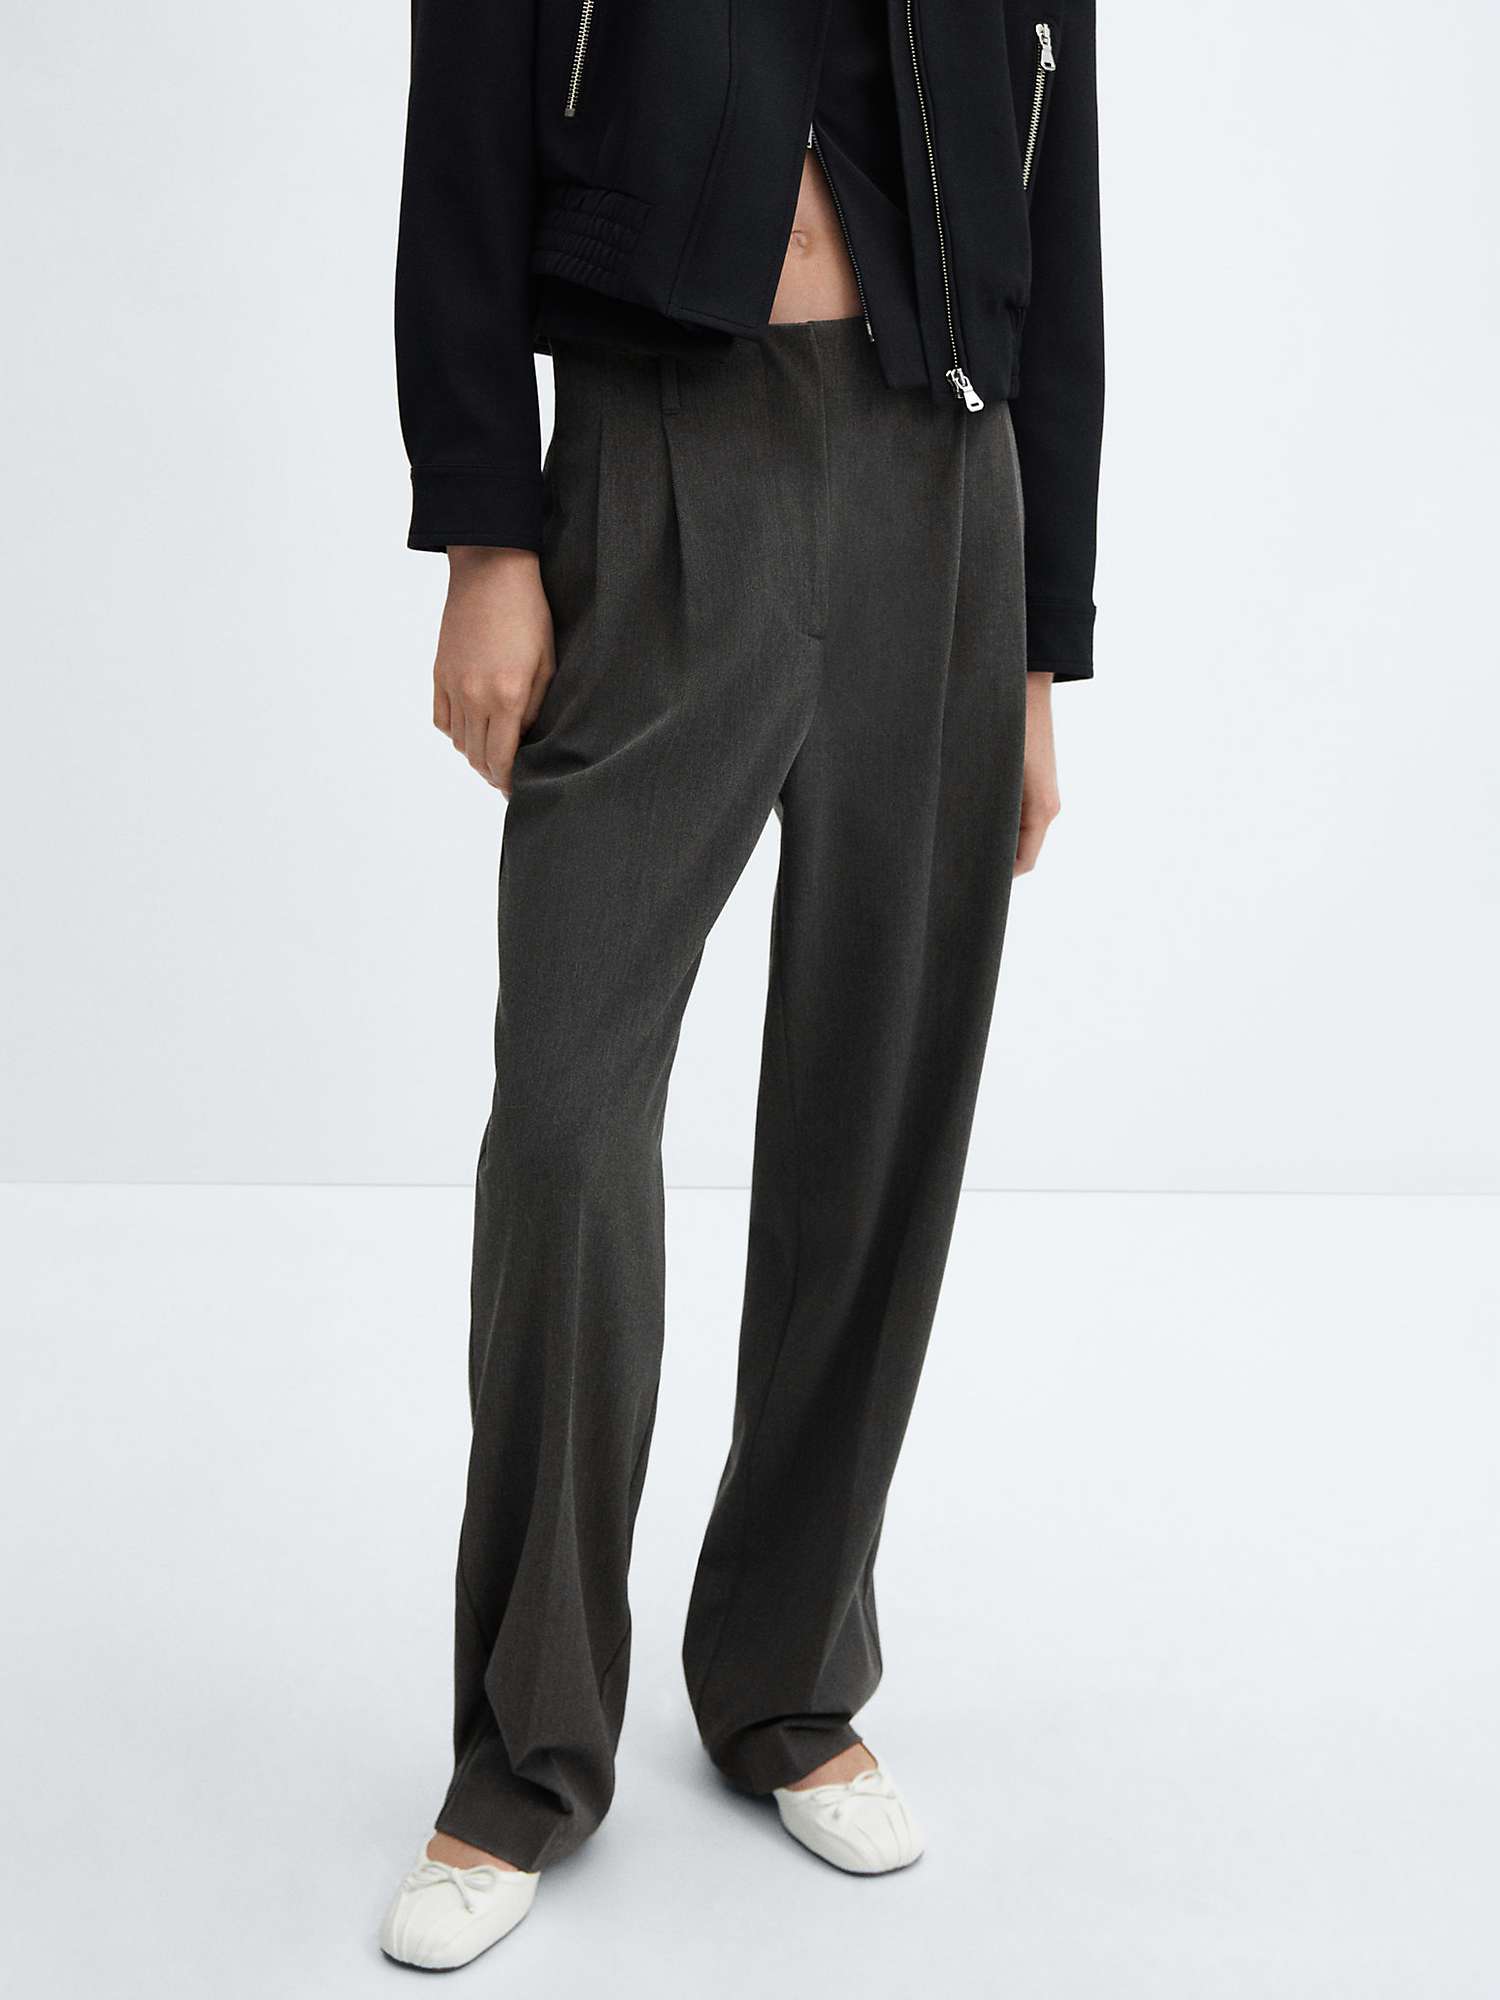 Buy Mango Avril Wide Leg Pleated Trousers, Grey Online at johnlewis.com